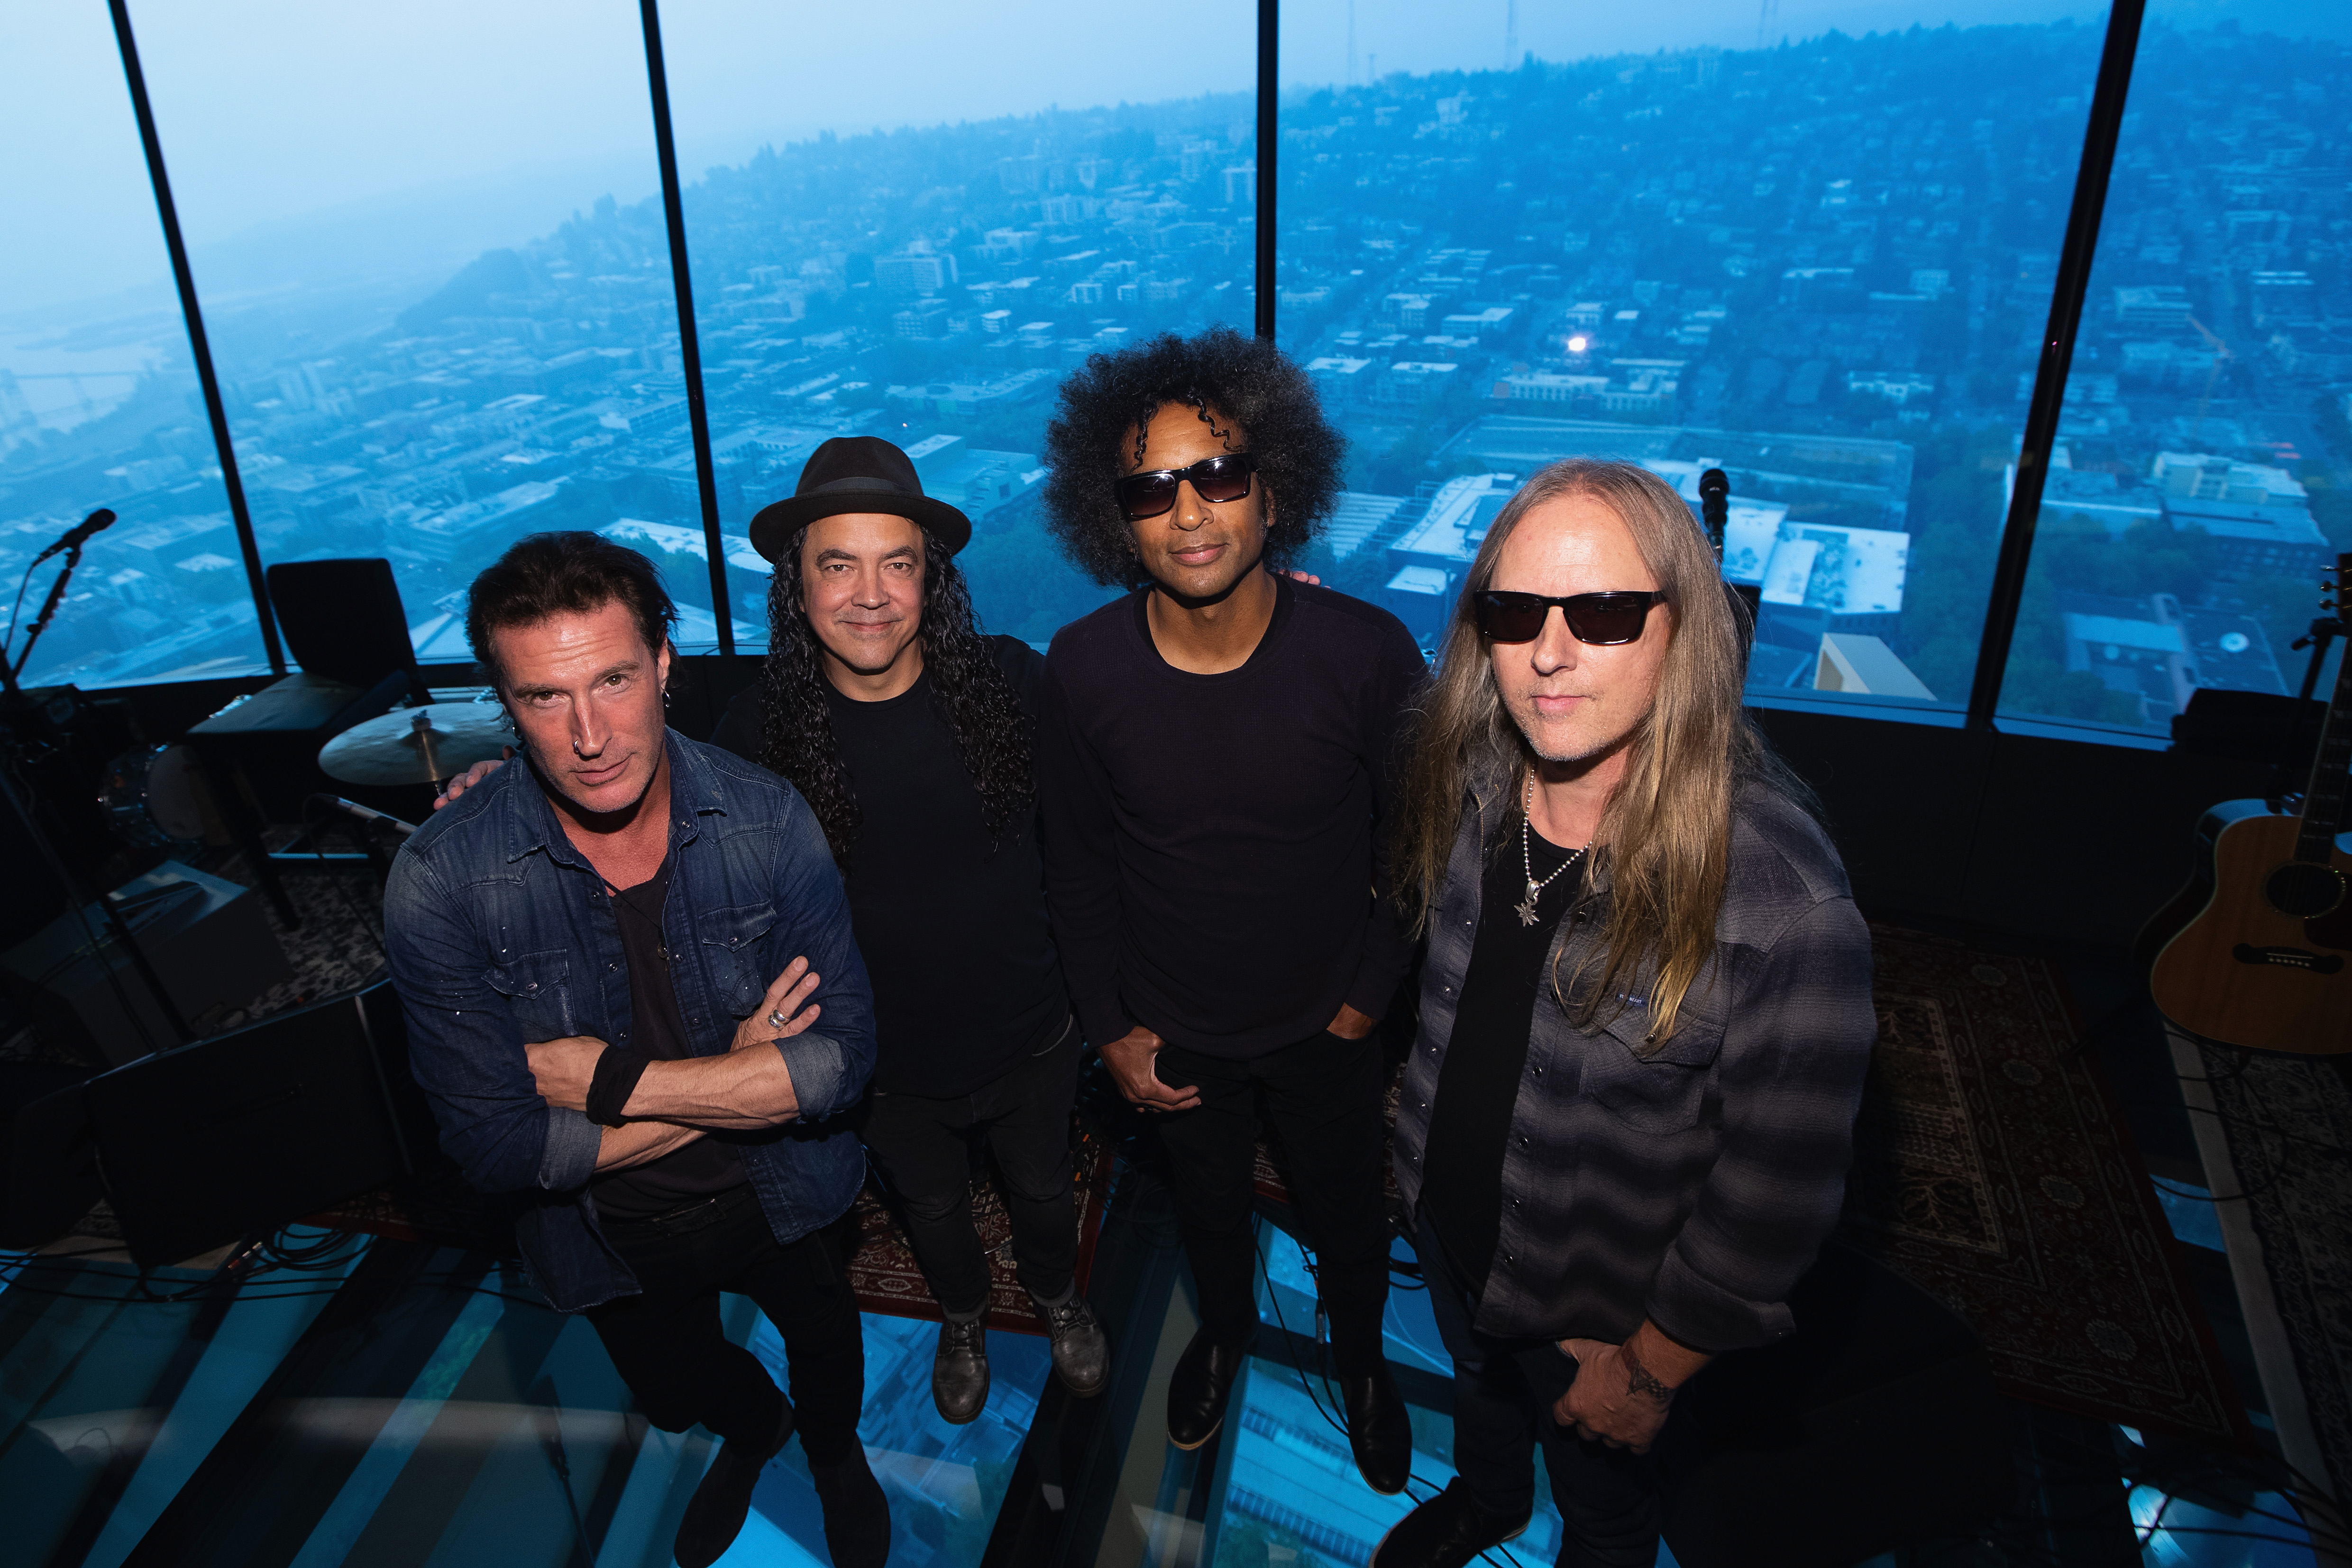 Alice in Chains: Sean Kinney, Mike Inez, William DuVall, and Jerry Cantrell